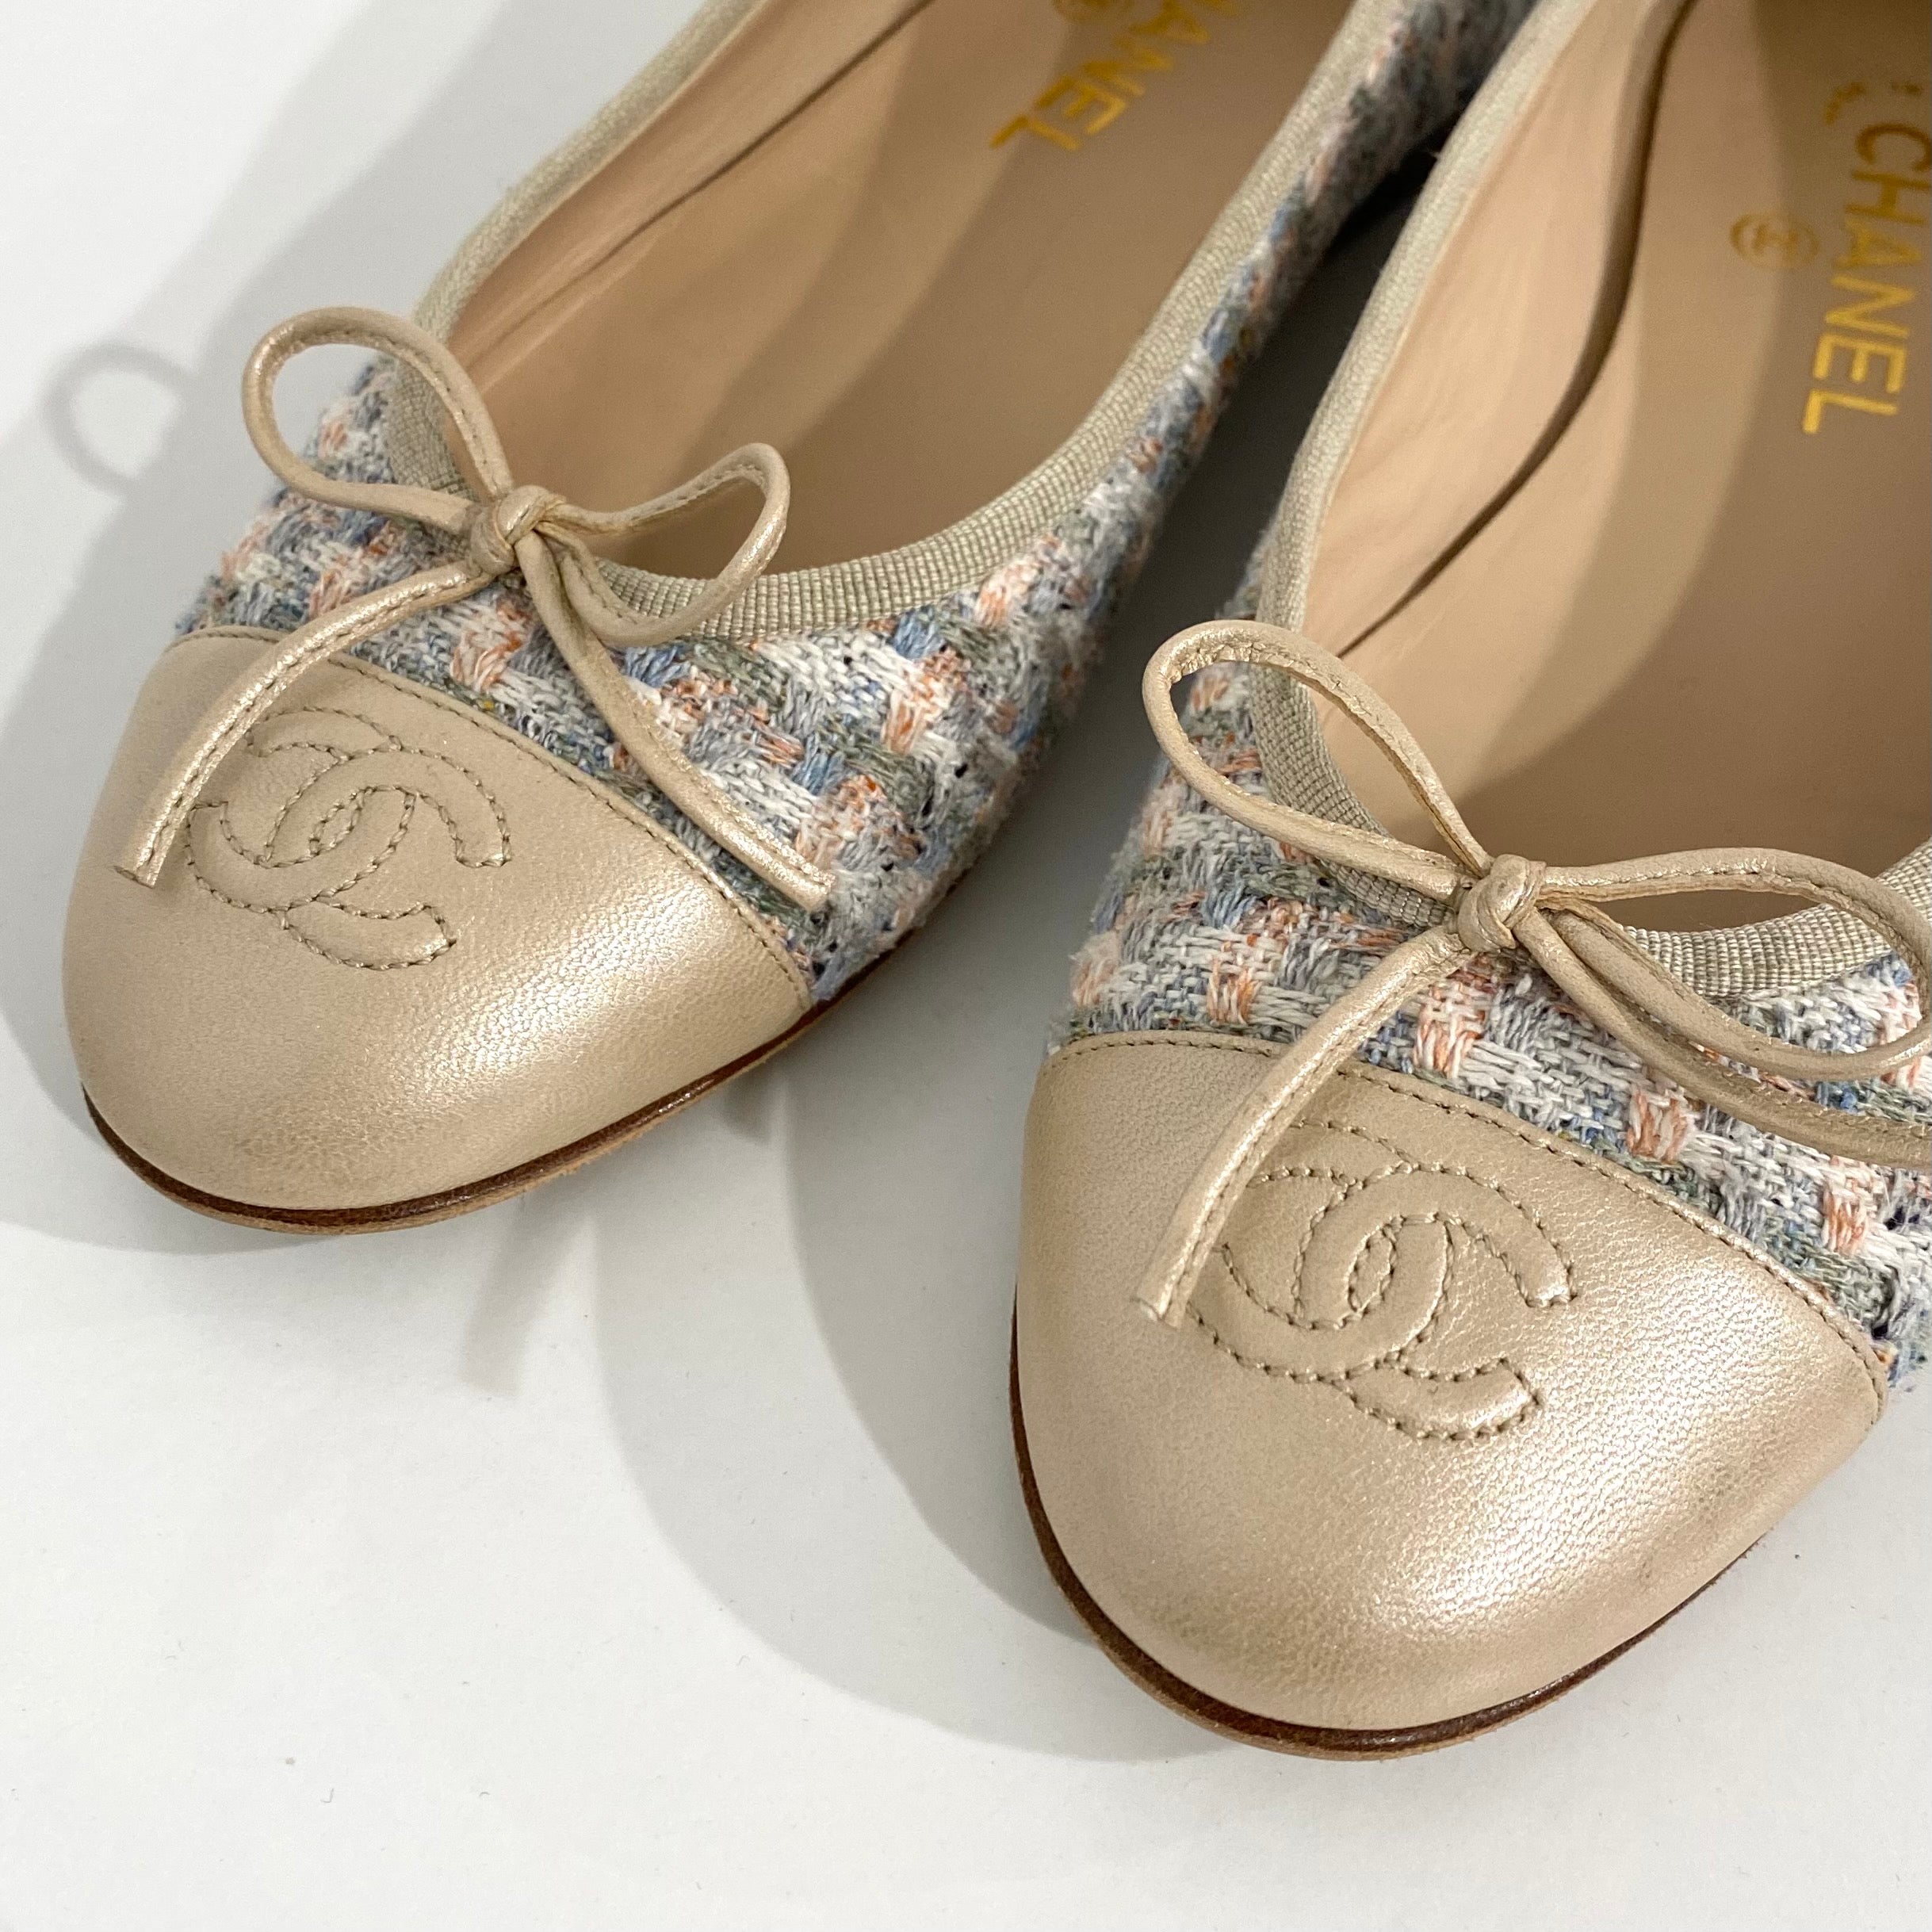 Marks and Spencer ballet flats, review